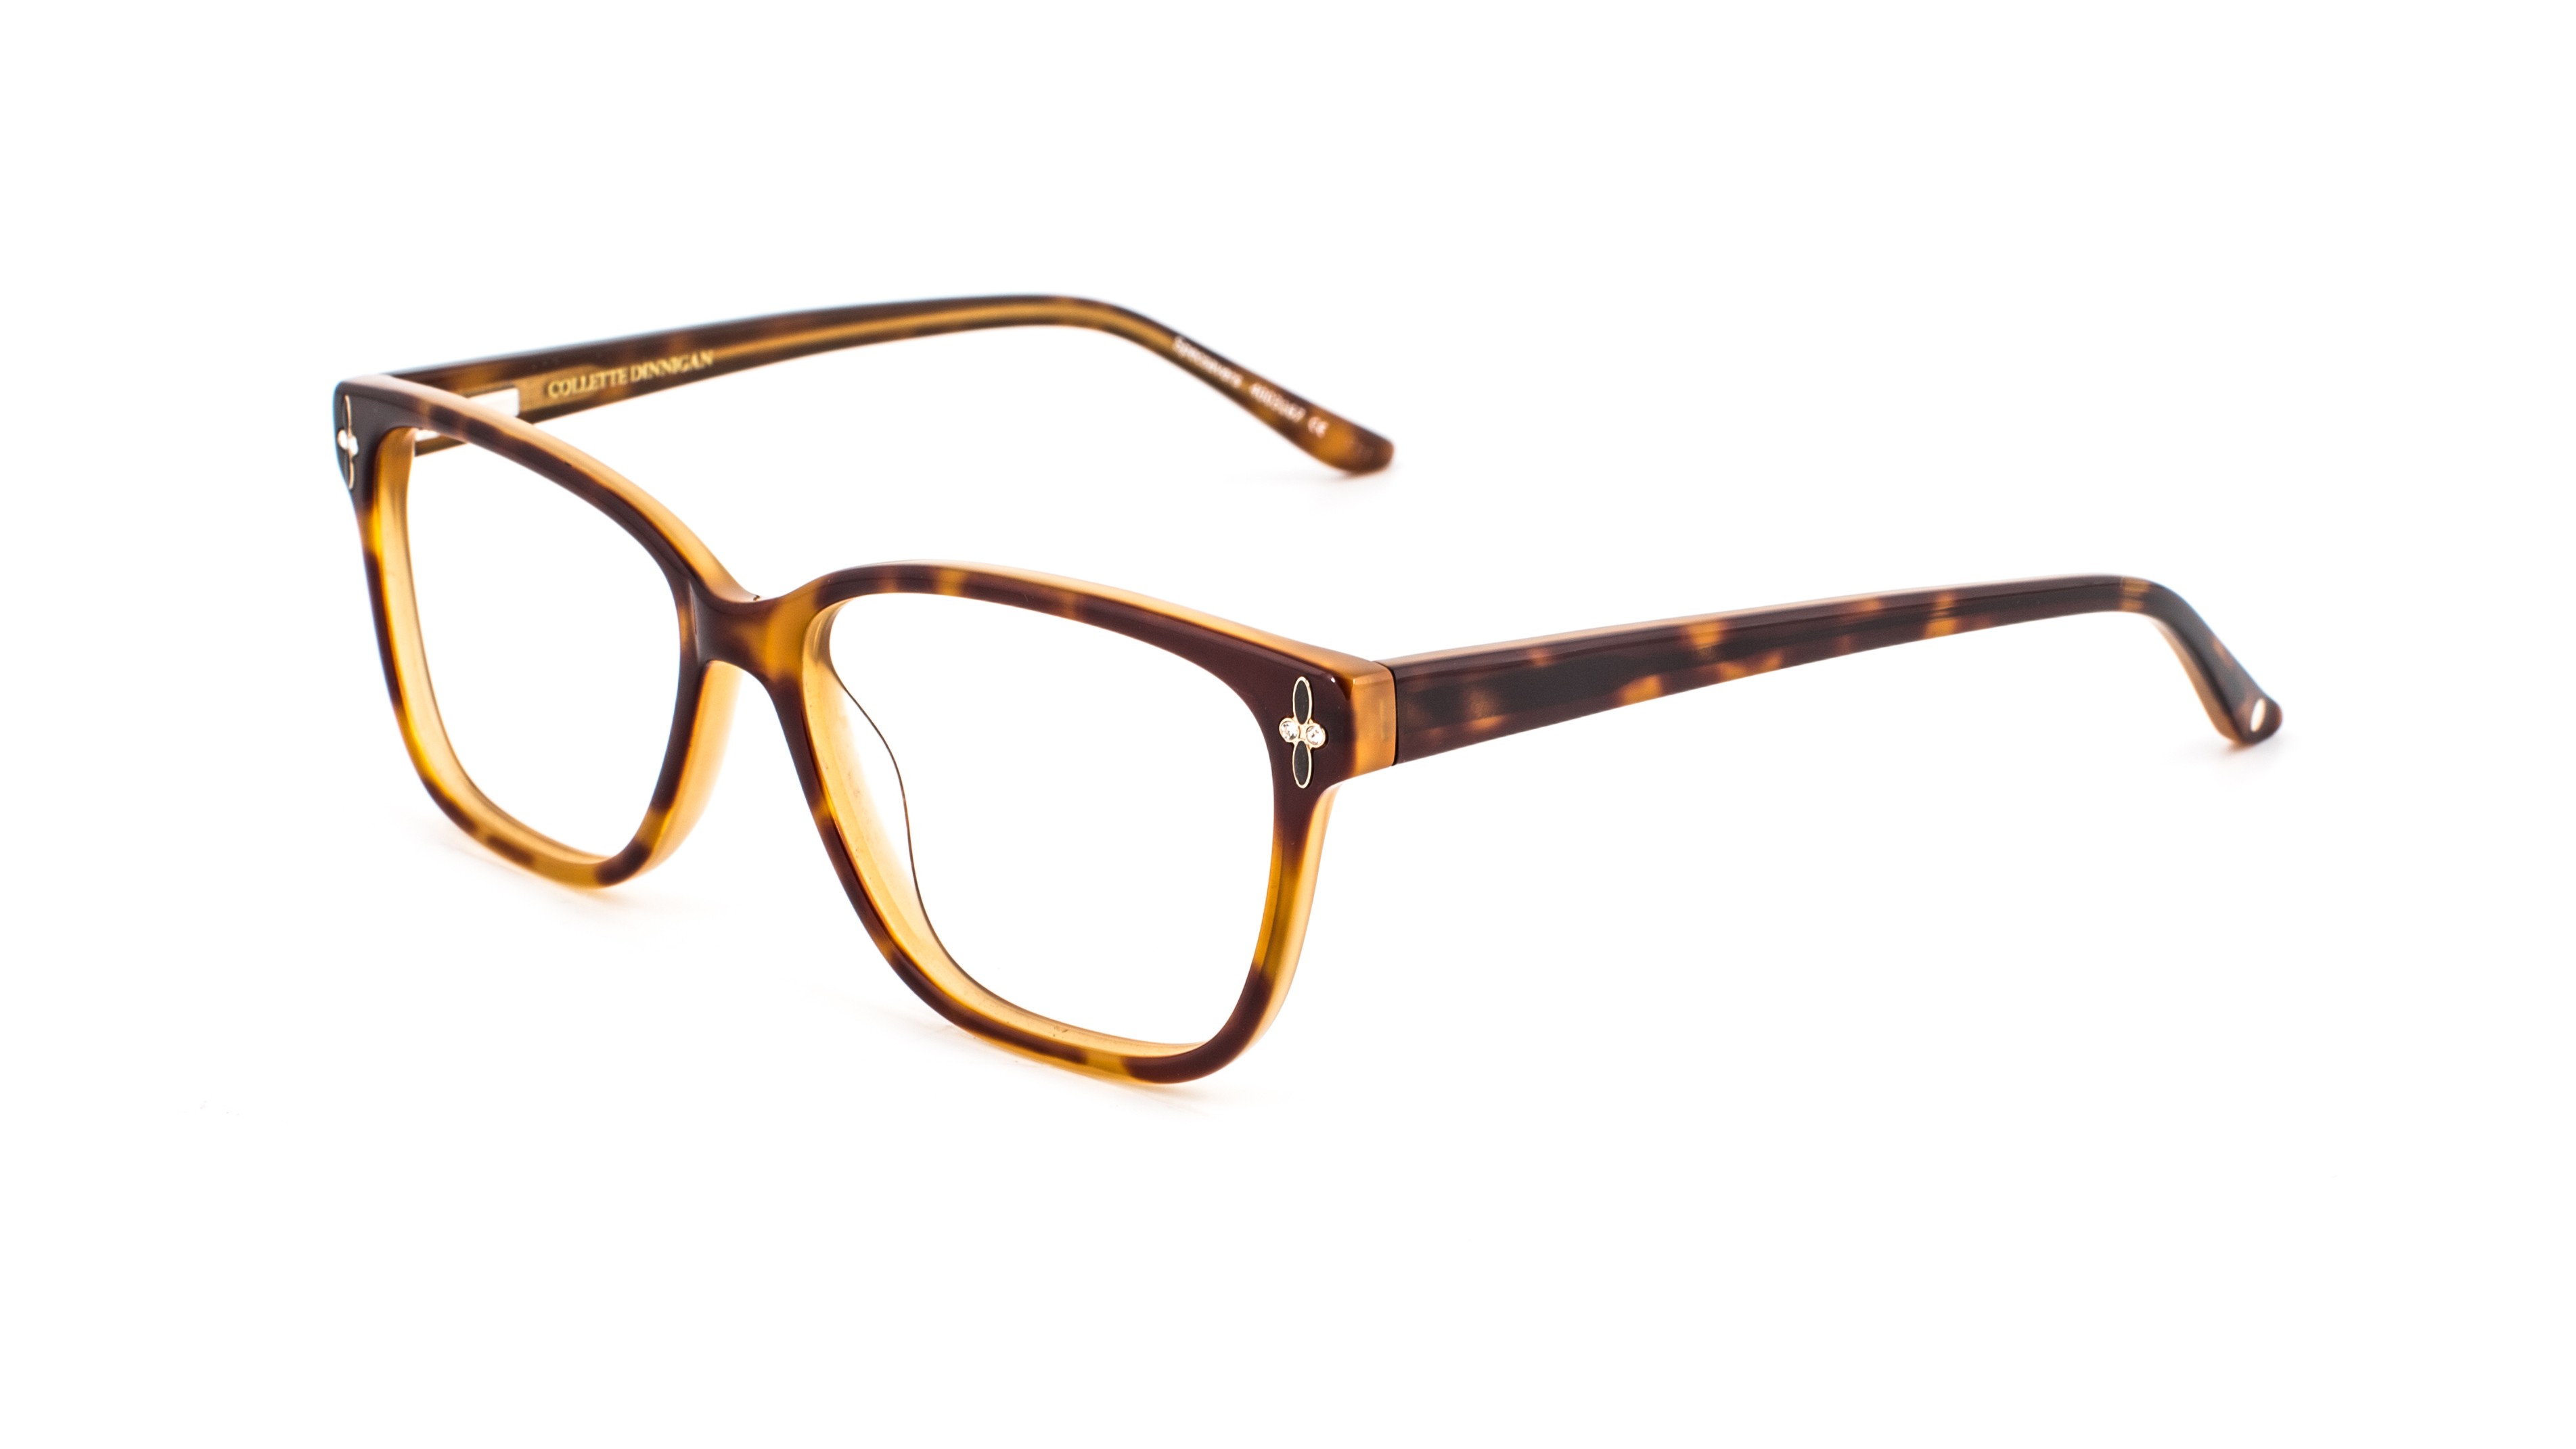 Frame Of Mind - The Specsaver Eyewear Trends of 2015 